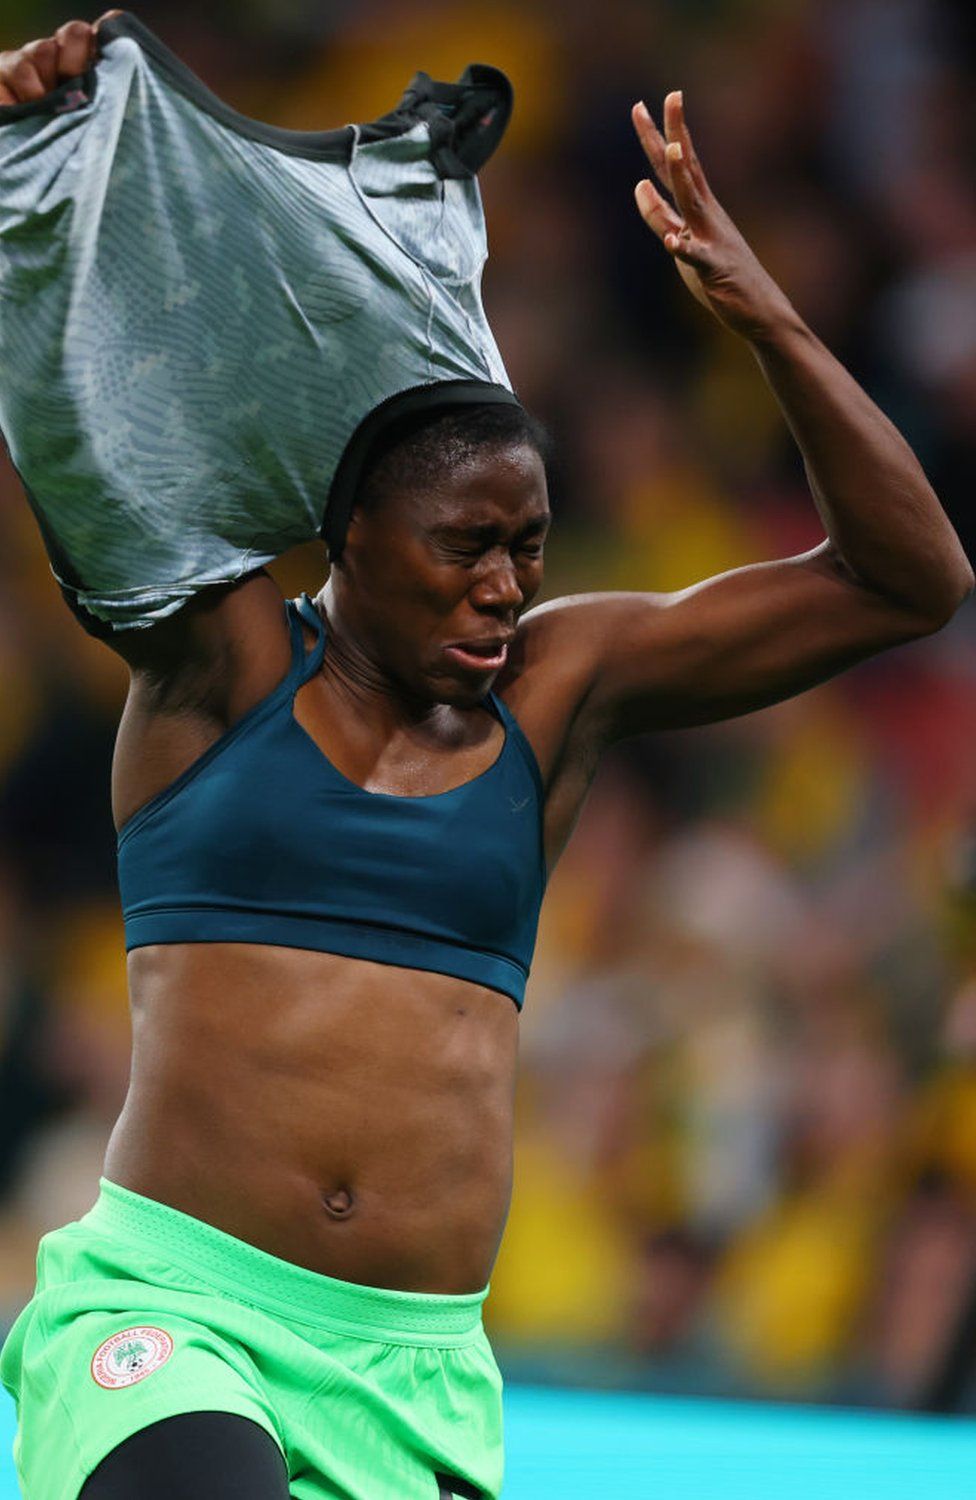 A female footballer takes her shirt off while celebrating a goal on Thursday.